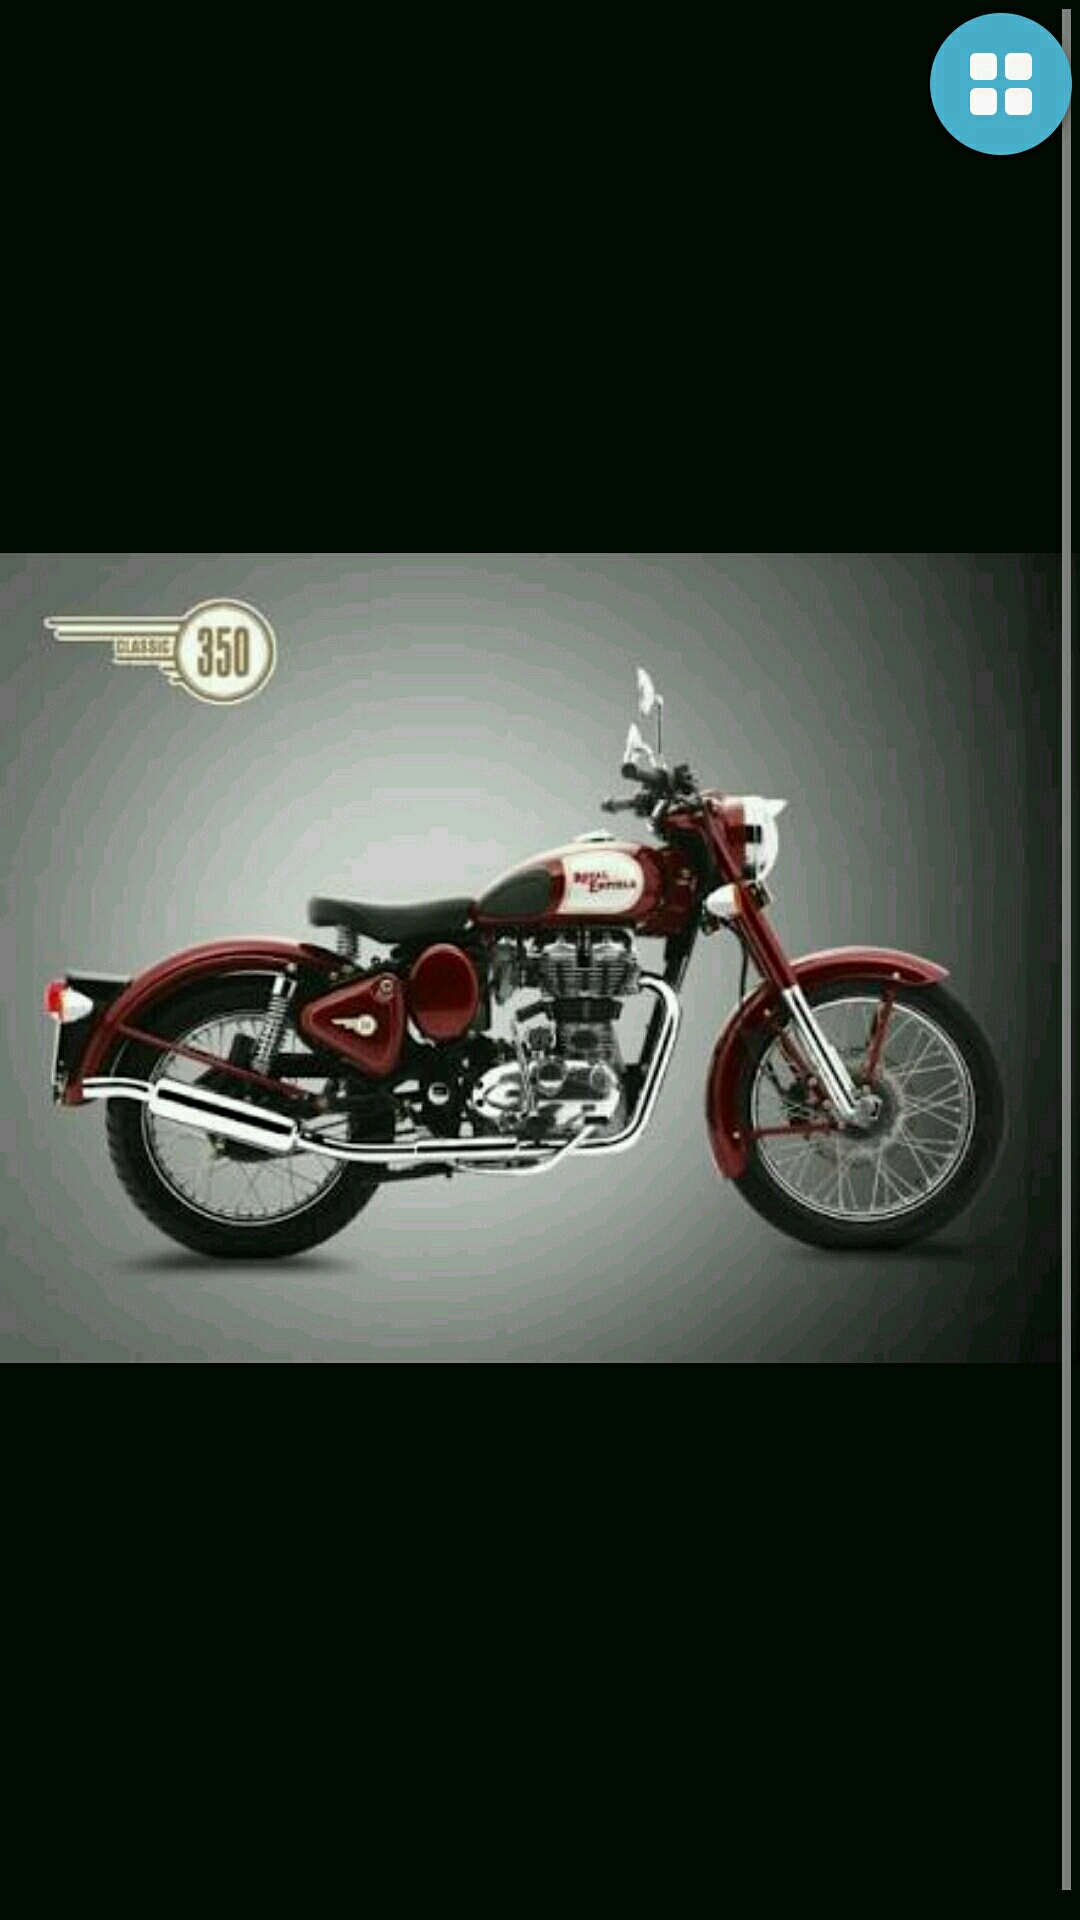 Royal Enfield Classic Photos Image And Wallpaper